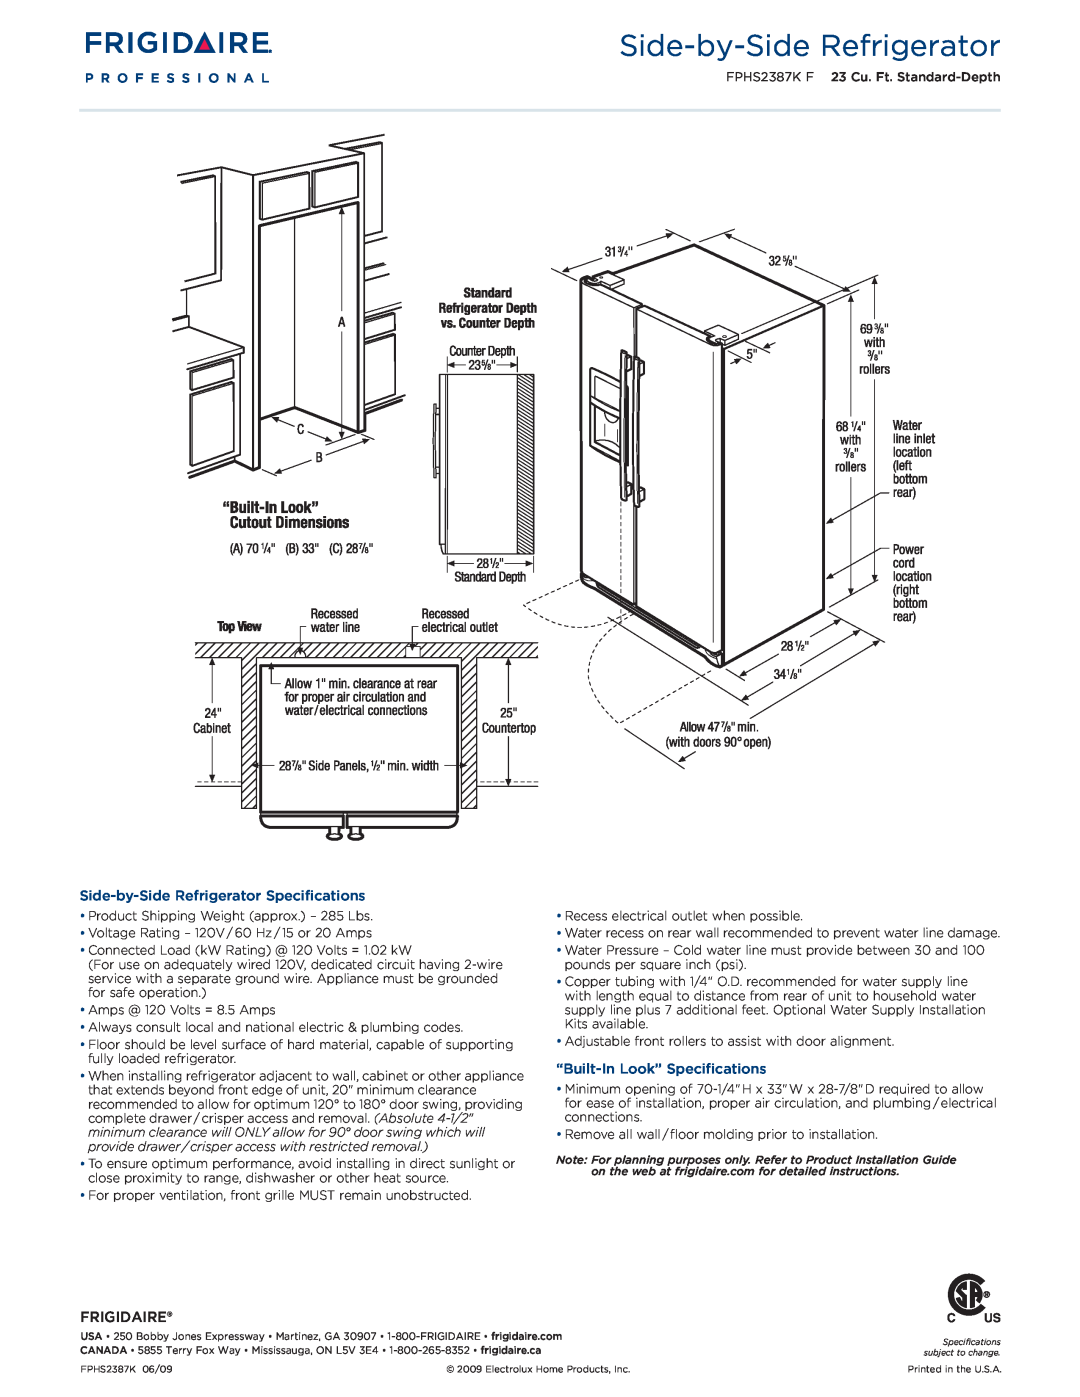 Frigidaire FPHS2387KF dimensions Side-by-SideRefrigerator Specifications, “Built-InLook” Specifications, Frigidaire 